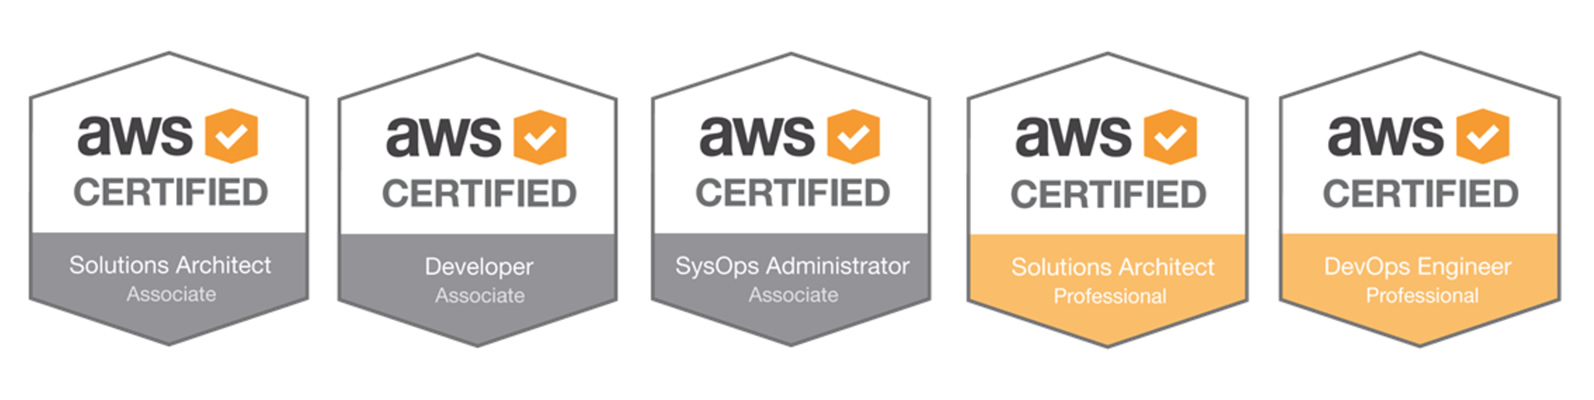 AWS-Certifications-5